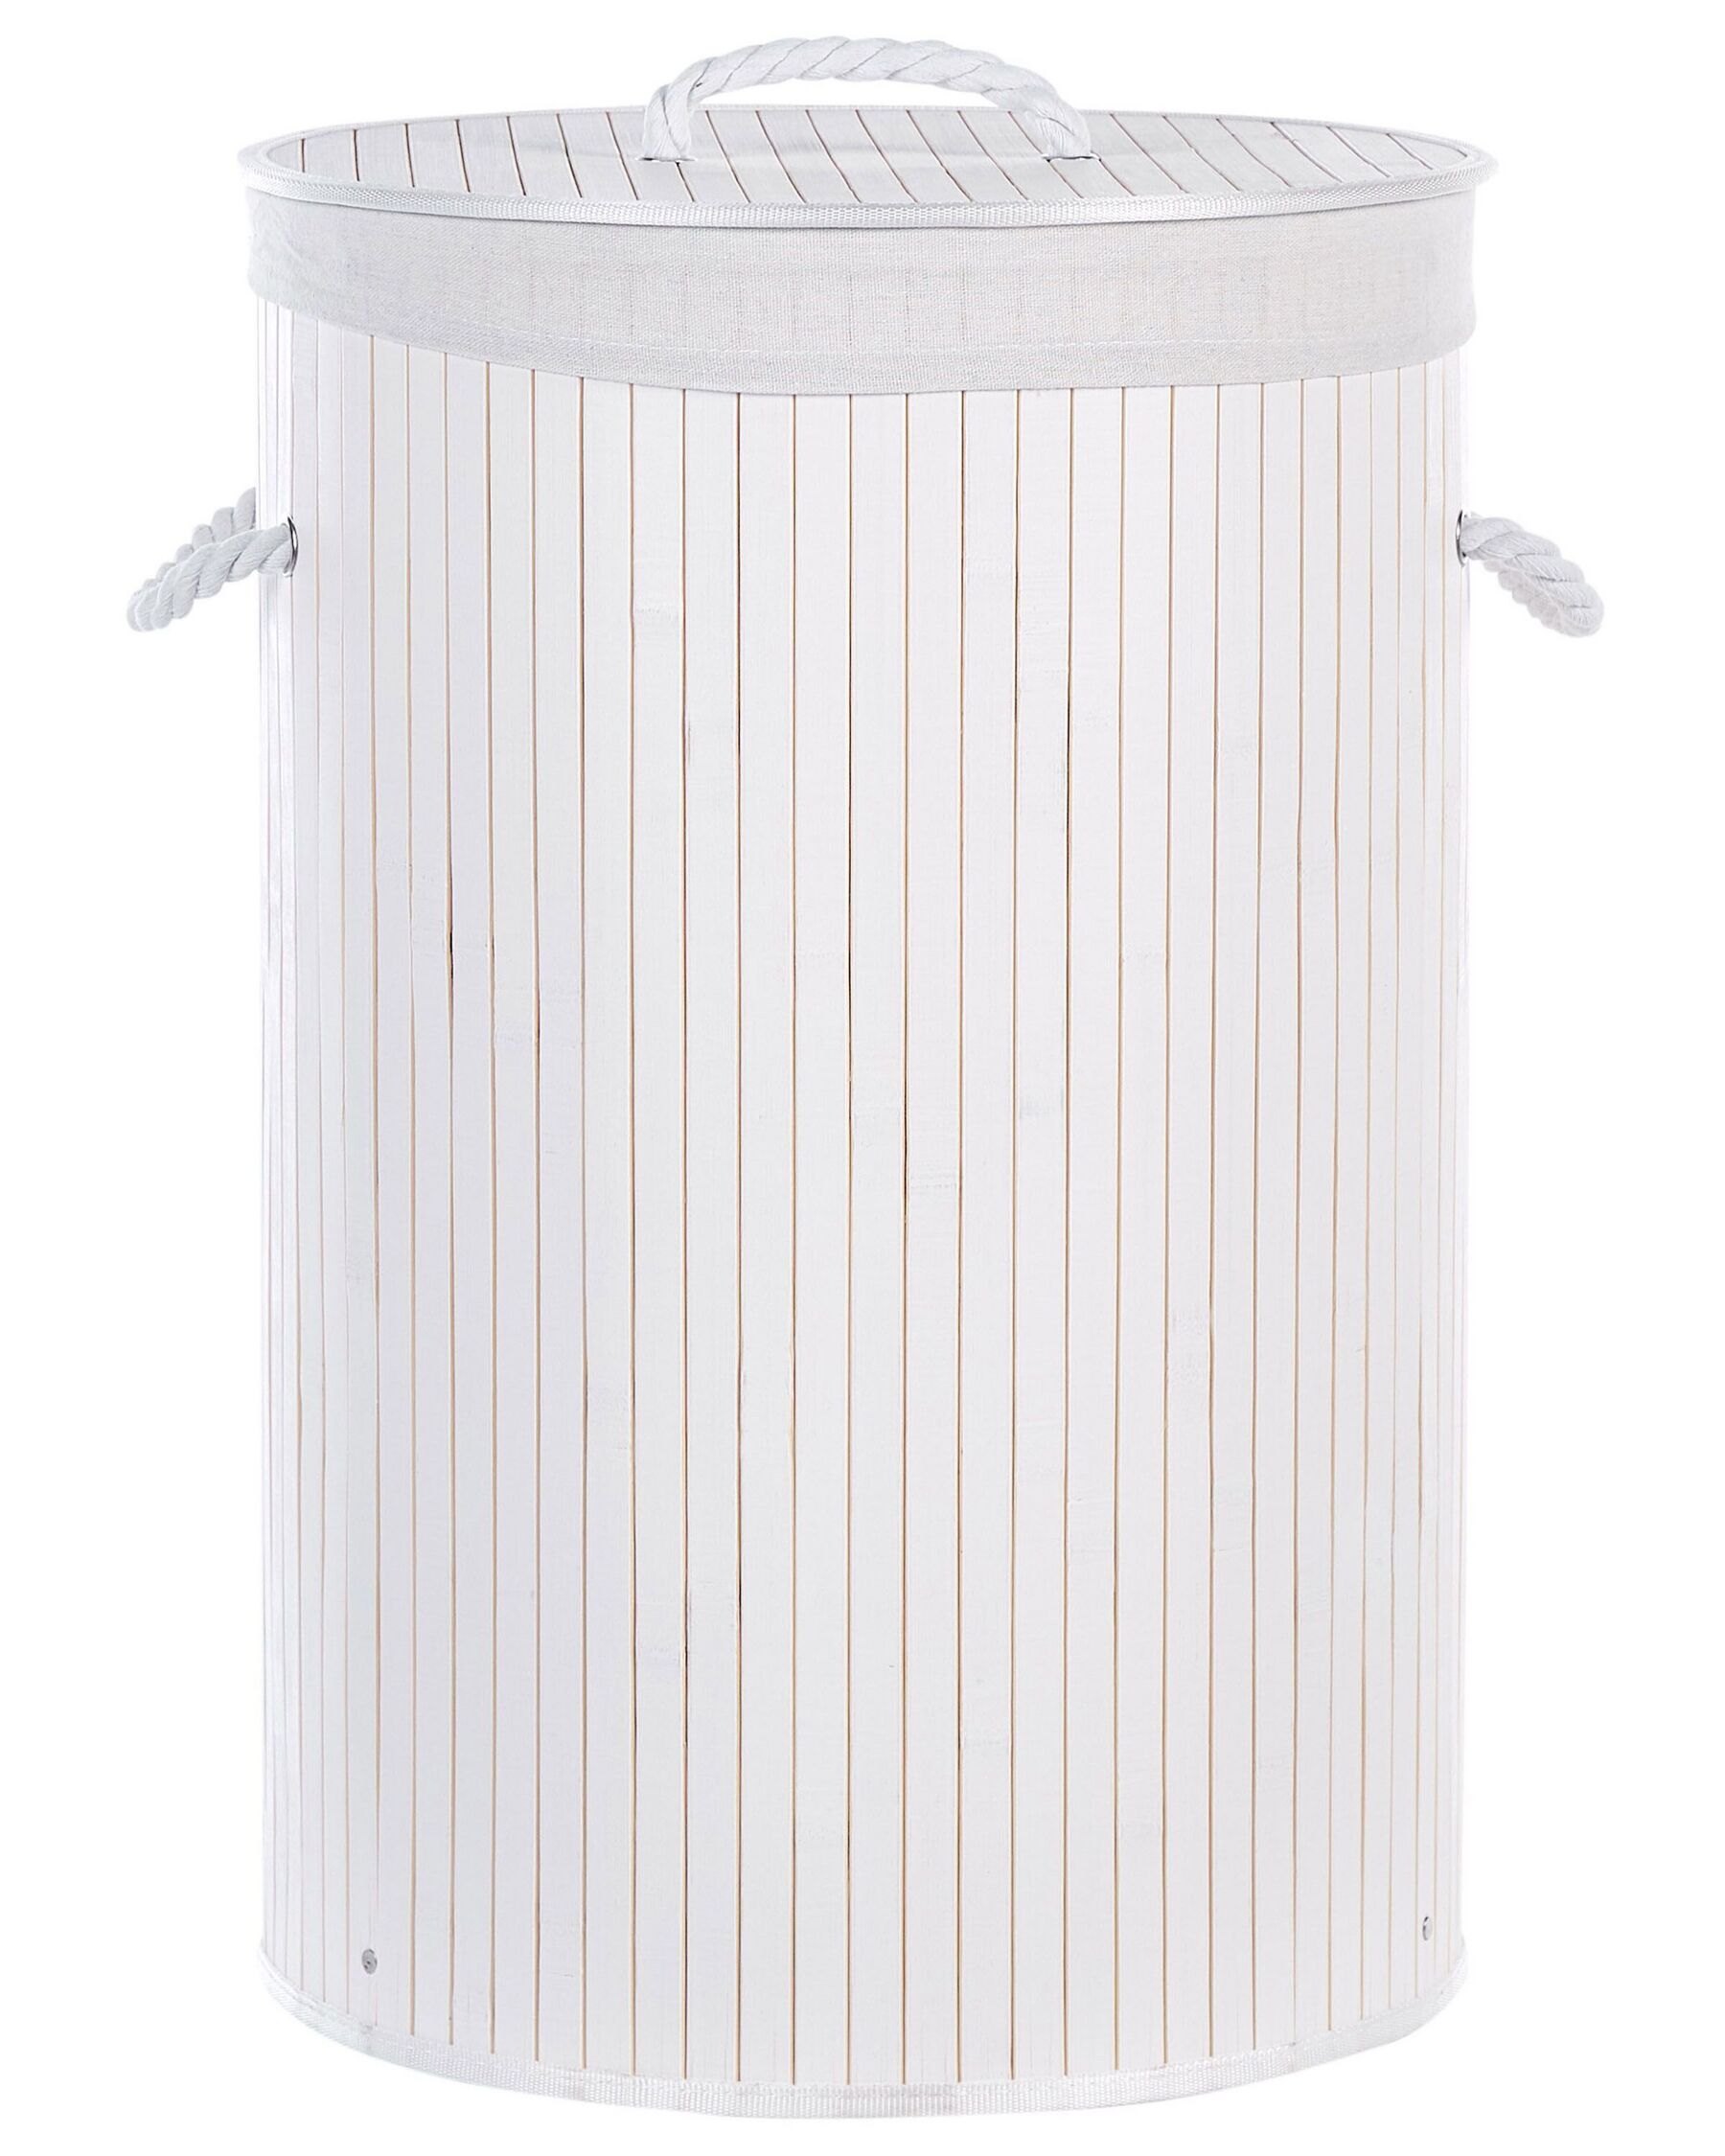 Bamboo Basket with Lid White SANNAR_849836